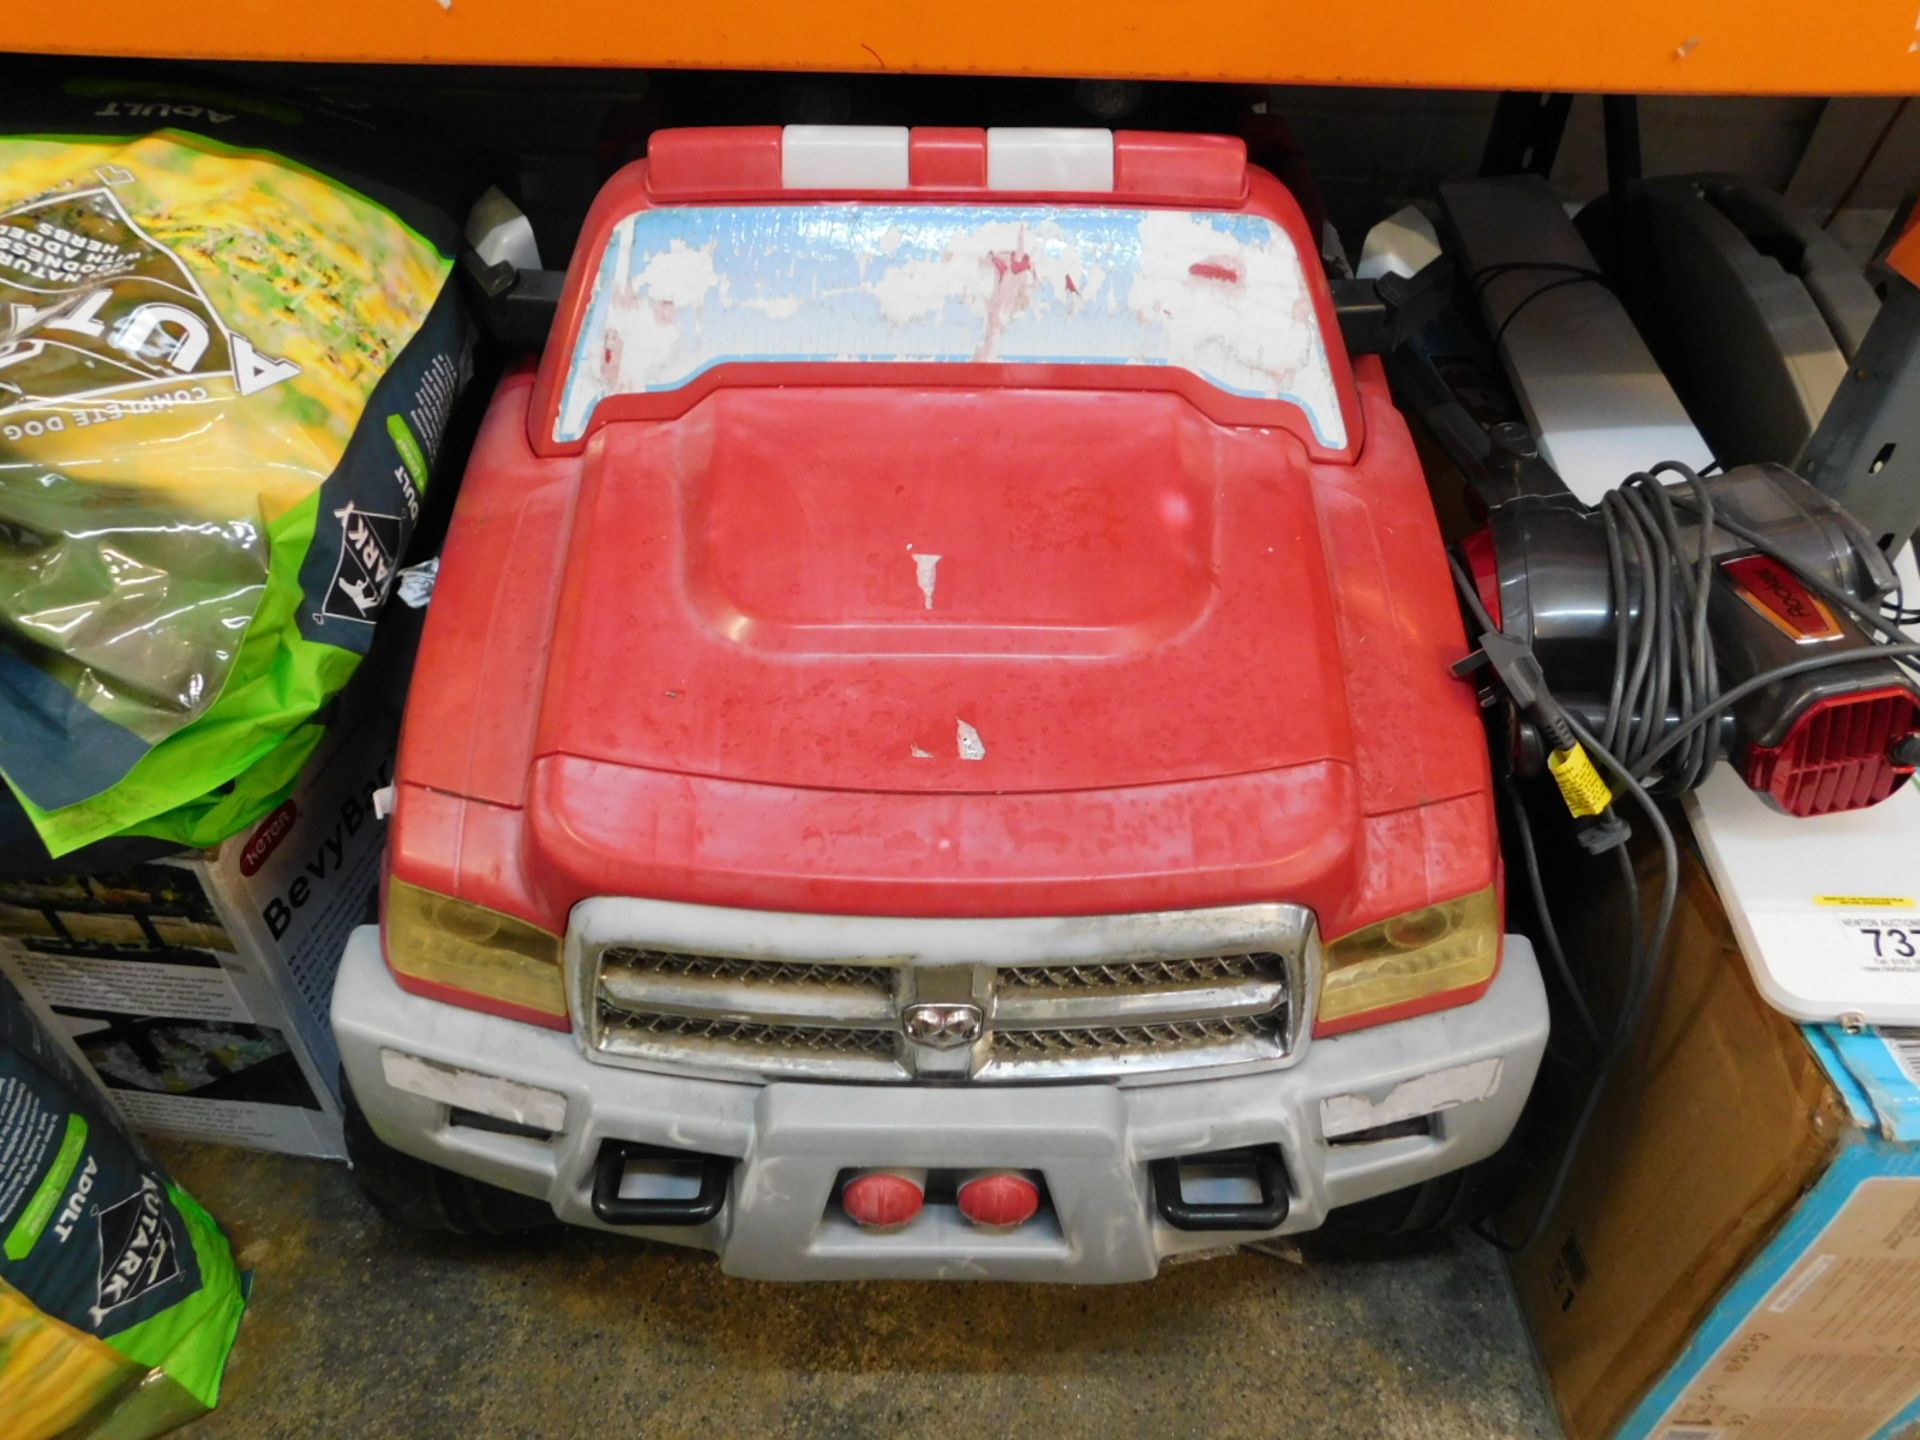 1 AVIGO RAM 3500 FIRE TRUCK 12V RIDE ON WITH CHARGER RRP Â£449 (POWERS ON/WORKING)